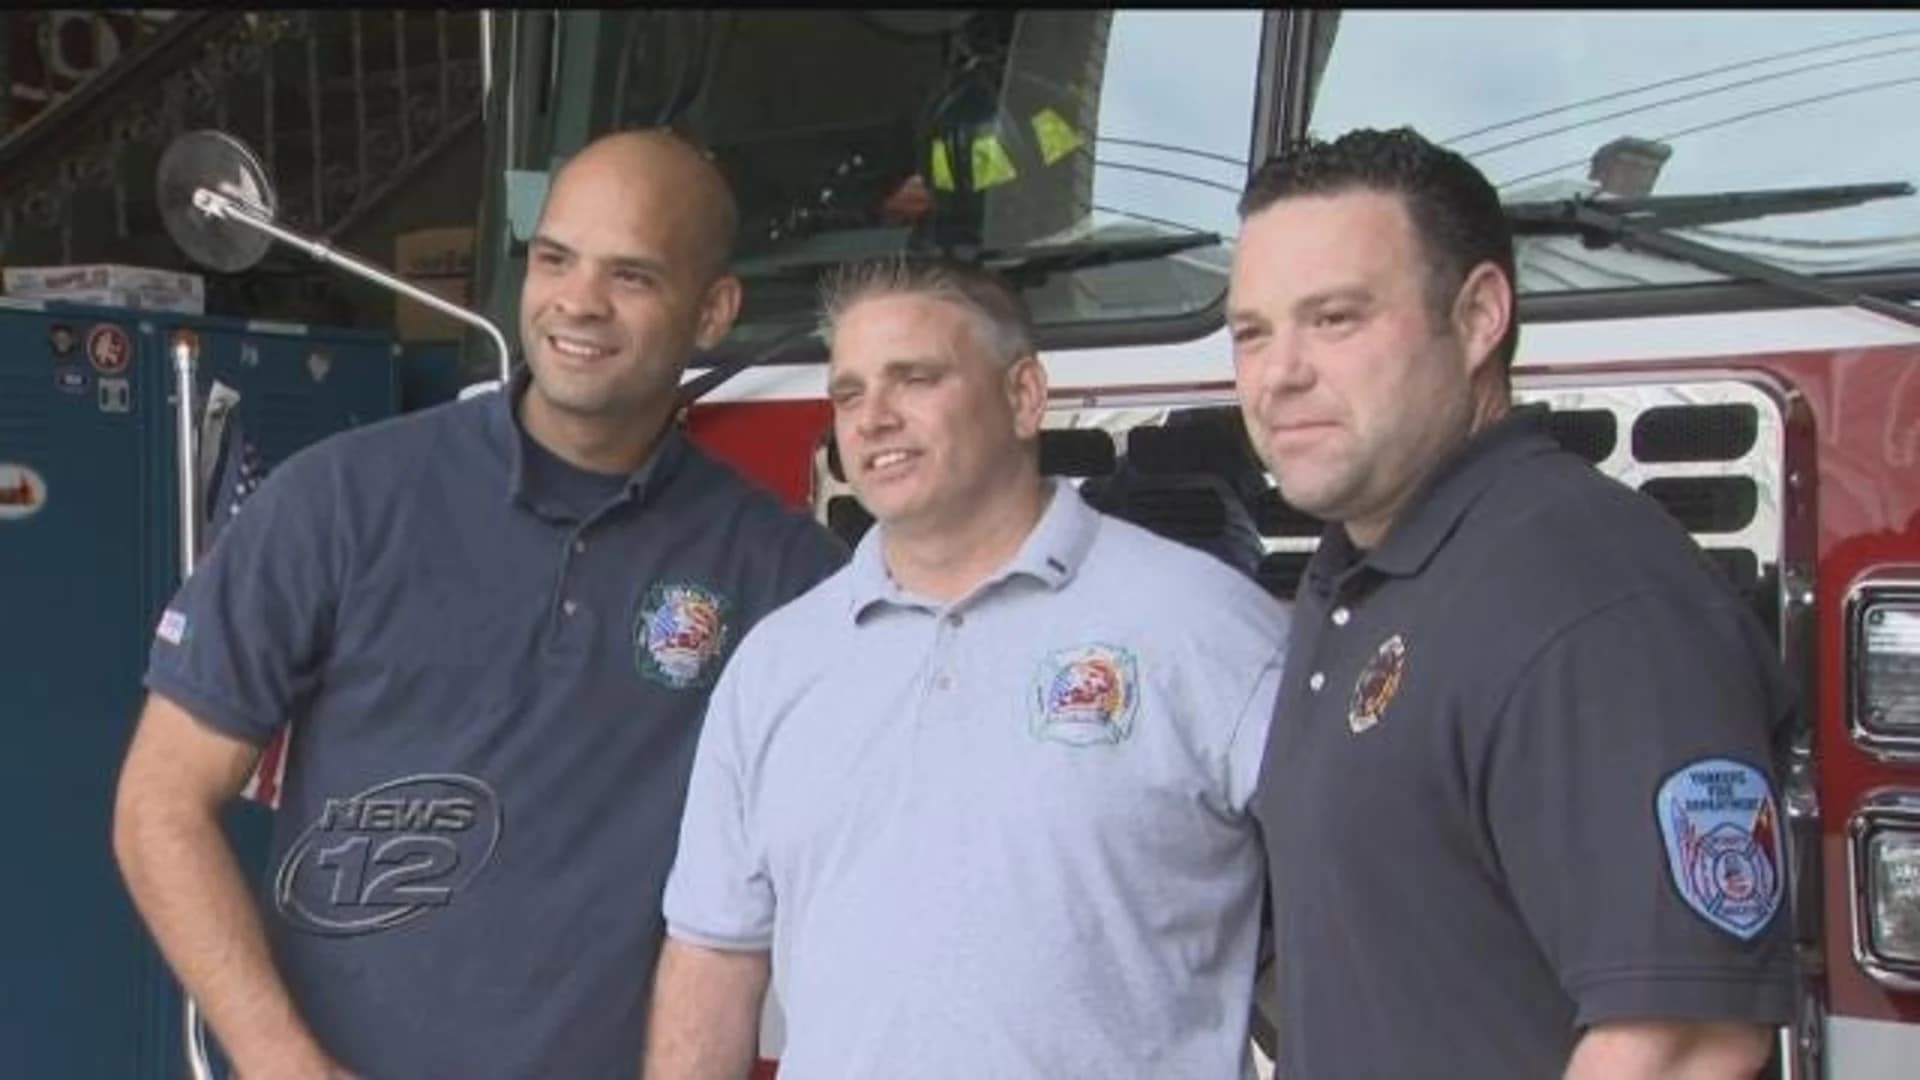 Firefighters help deliver baby boy